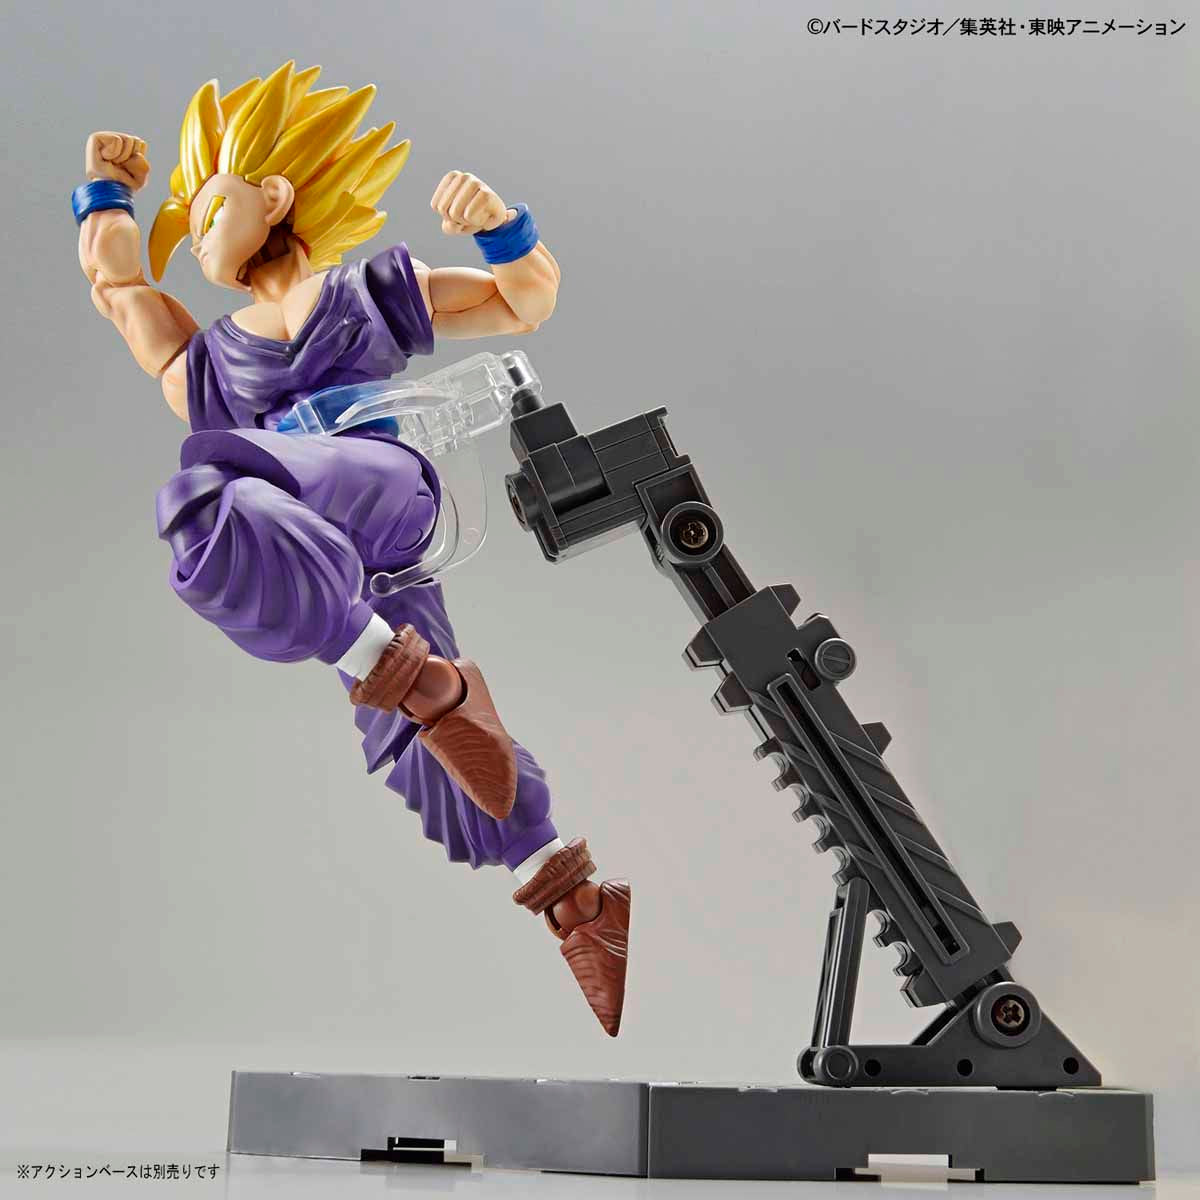 Dragon Ball - Super Saiyan 2 Son Goku - Figure-rise Standard Model Kit, Includes effect parts for charging and releasing the Kamehameha wave, by Bandai, from Nippon Figures.